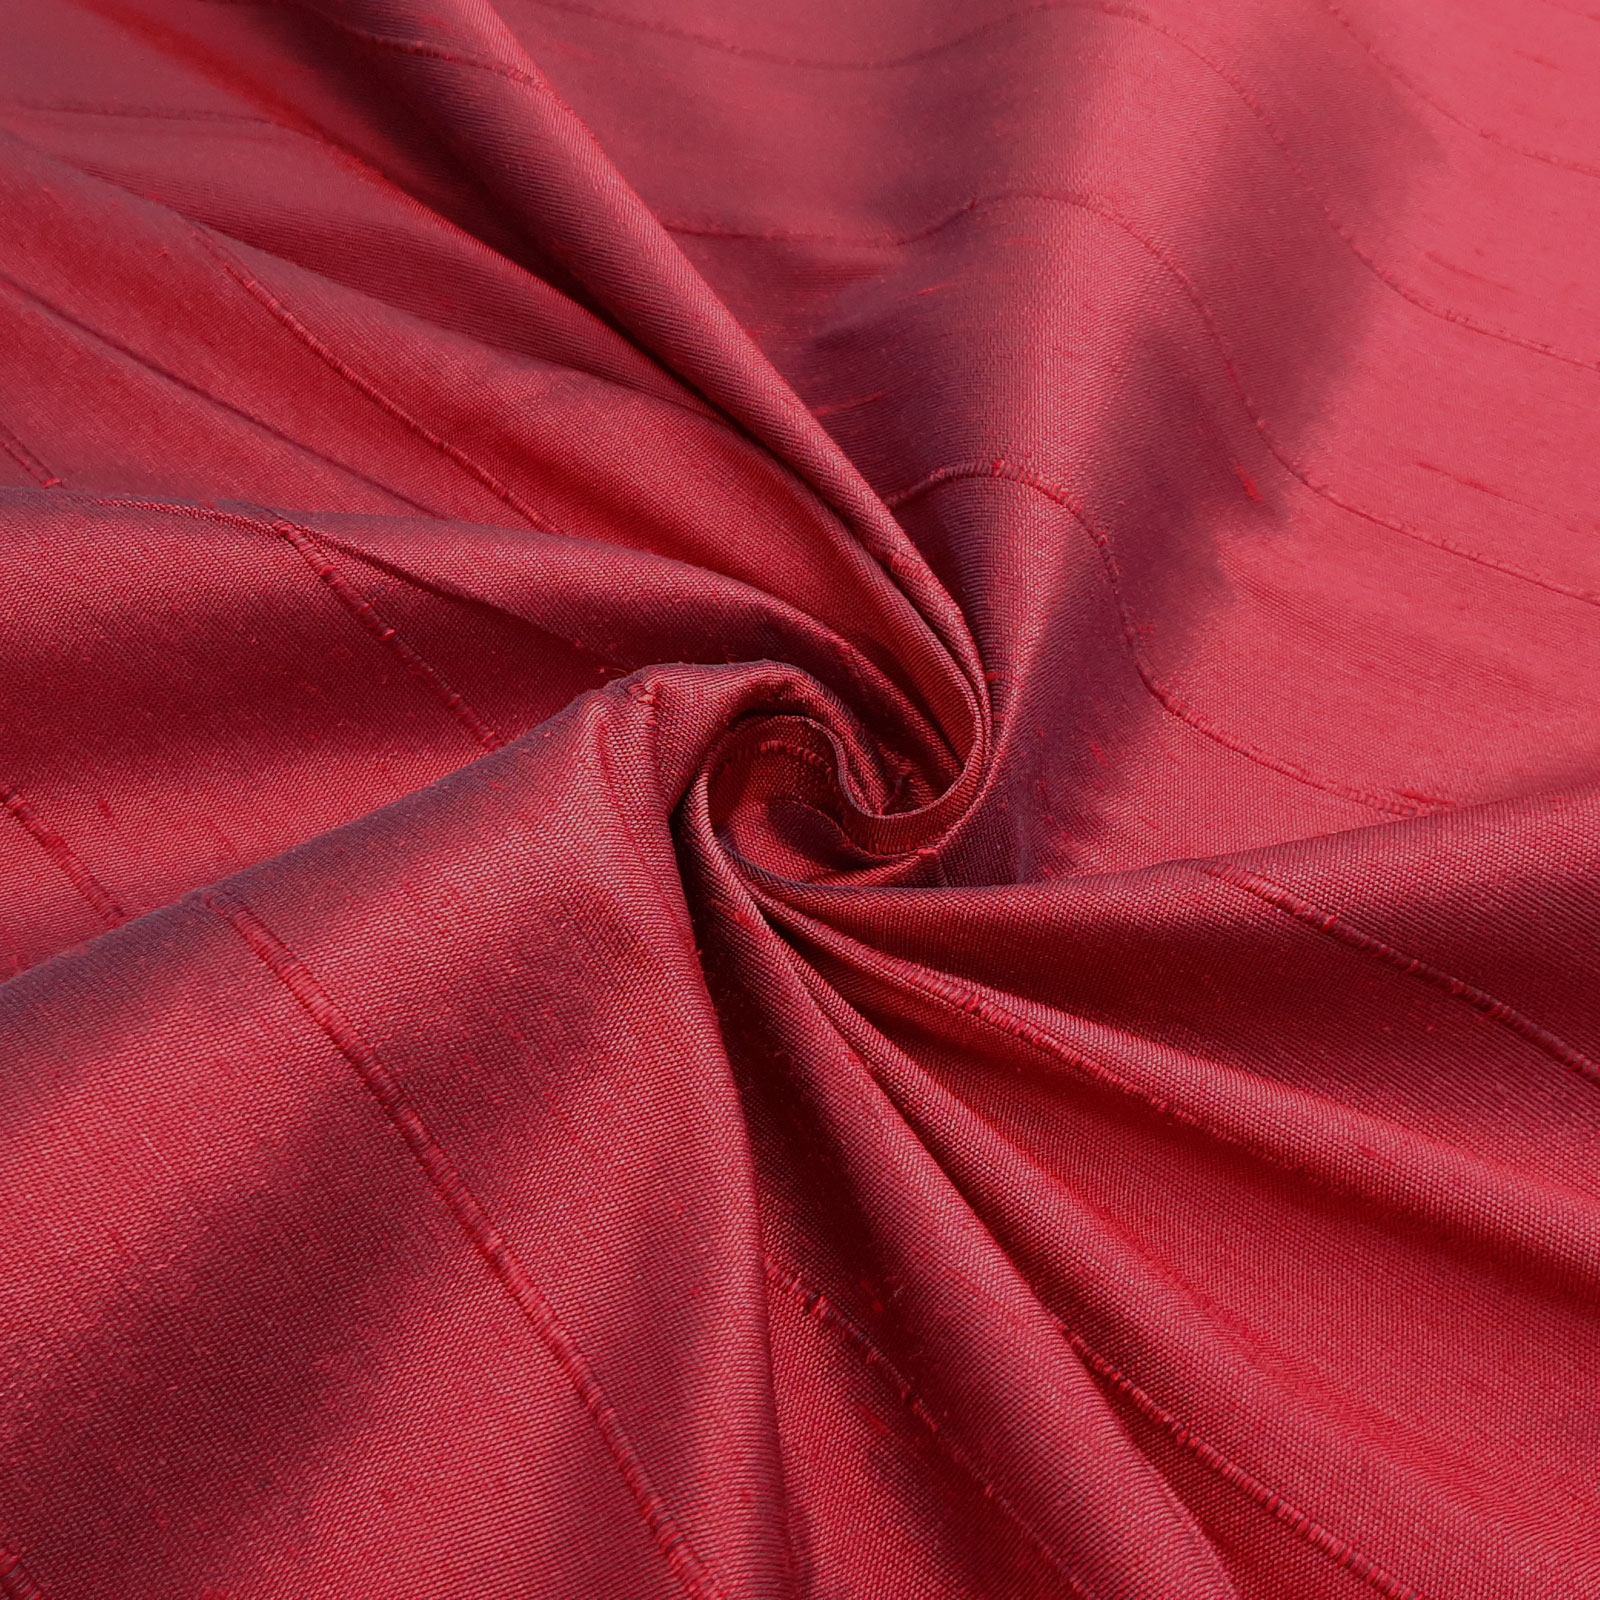 Sahco® B057 - Upholstery and decoration fabric - 100% silk - Ruby